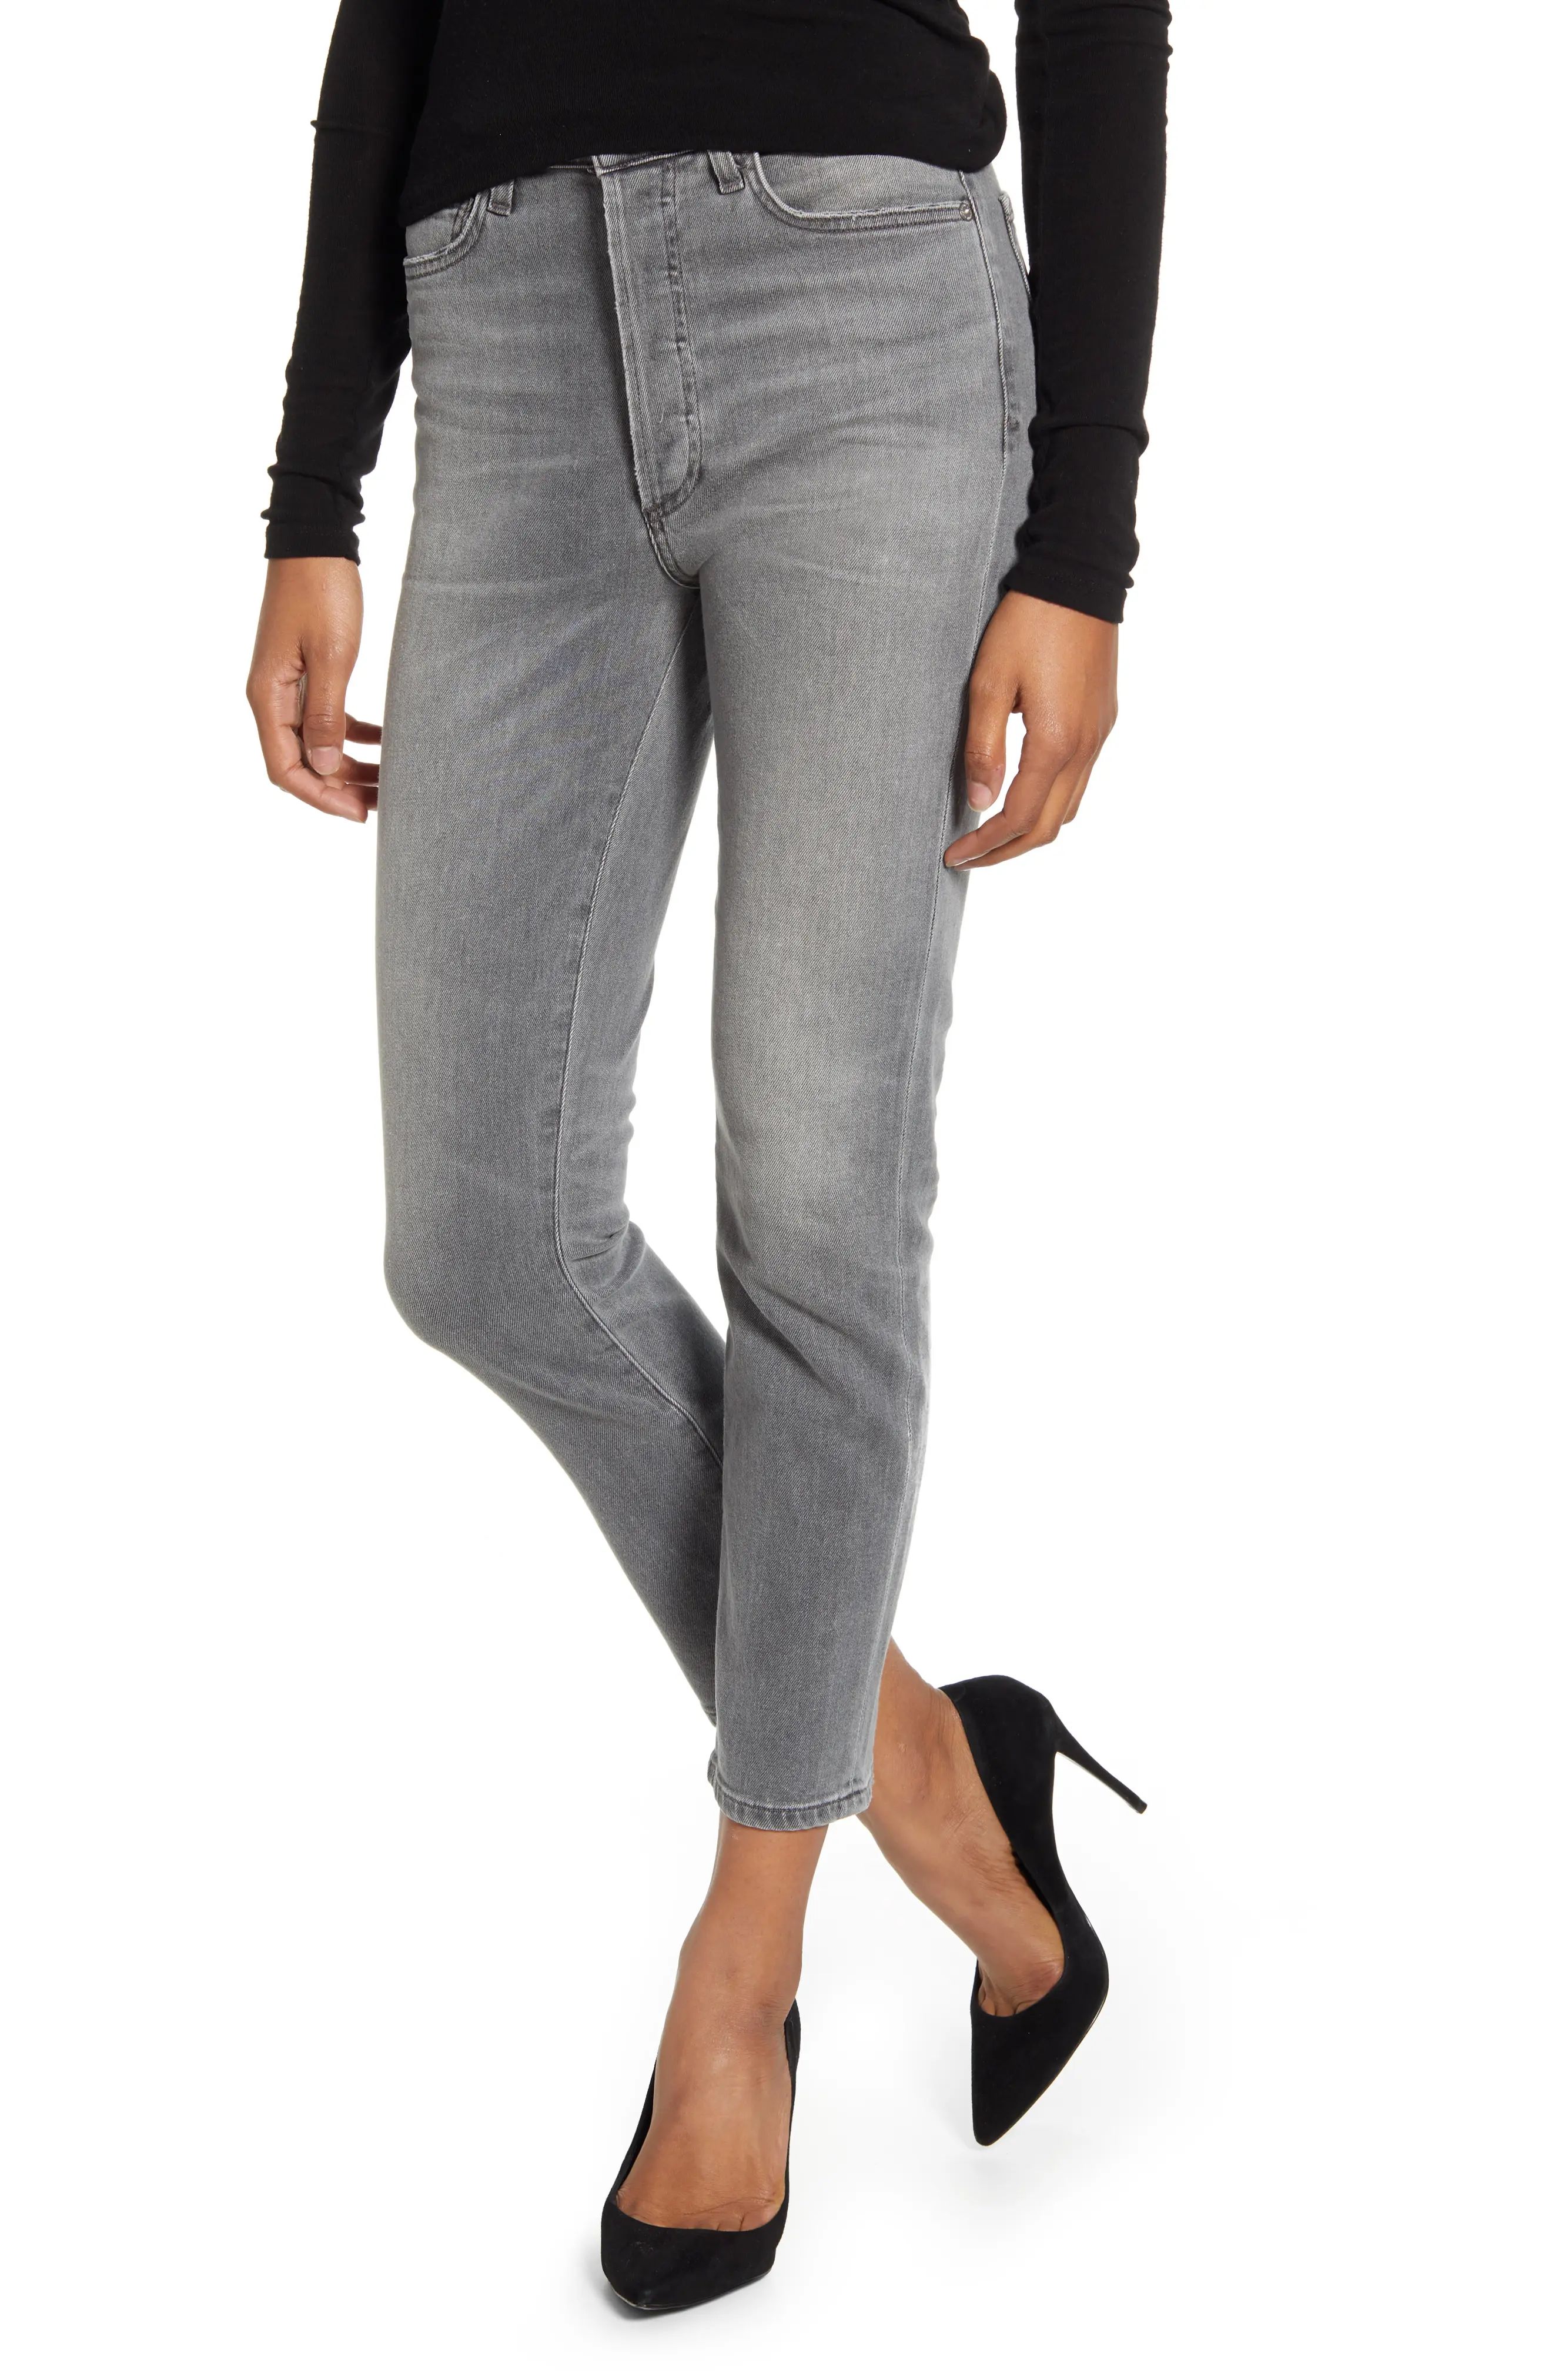 Women's Citizens Of Humanity Olivia High Waist Slim Ankle Jeans, Size 25 - Grey | Nordstrom